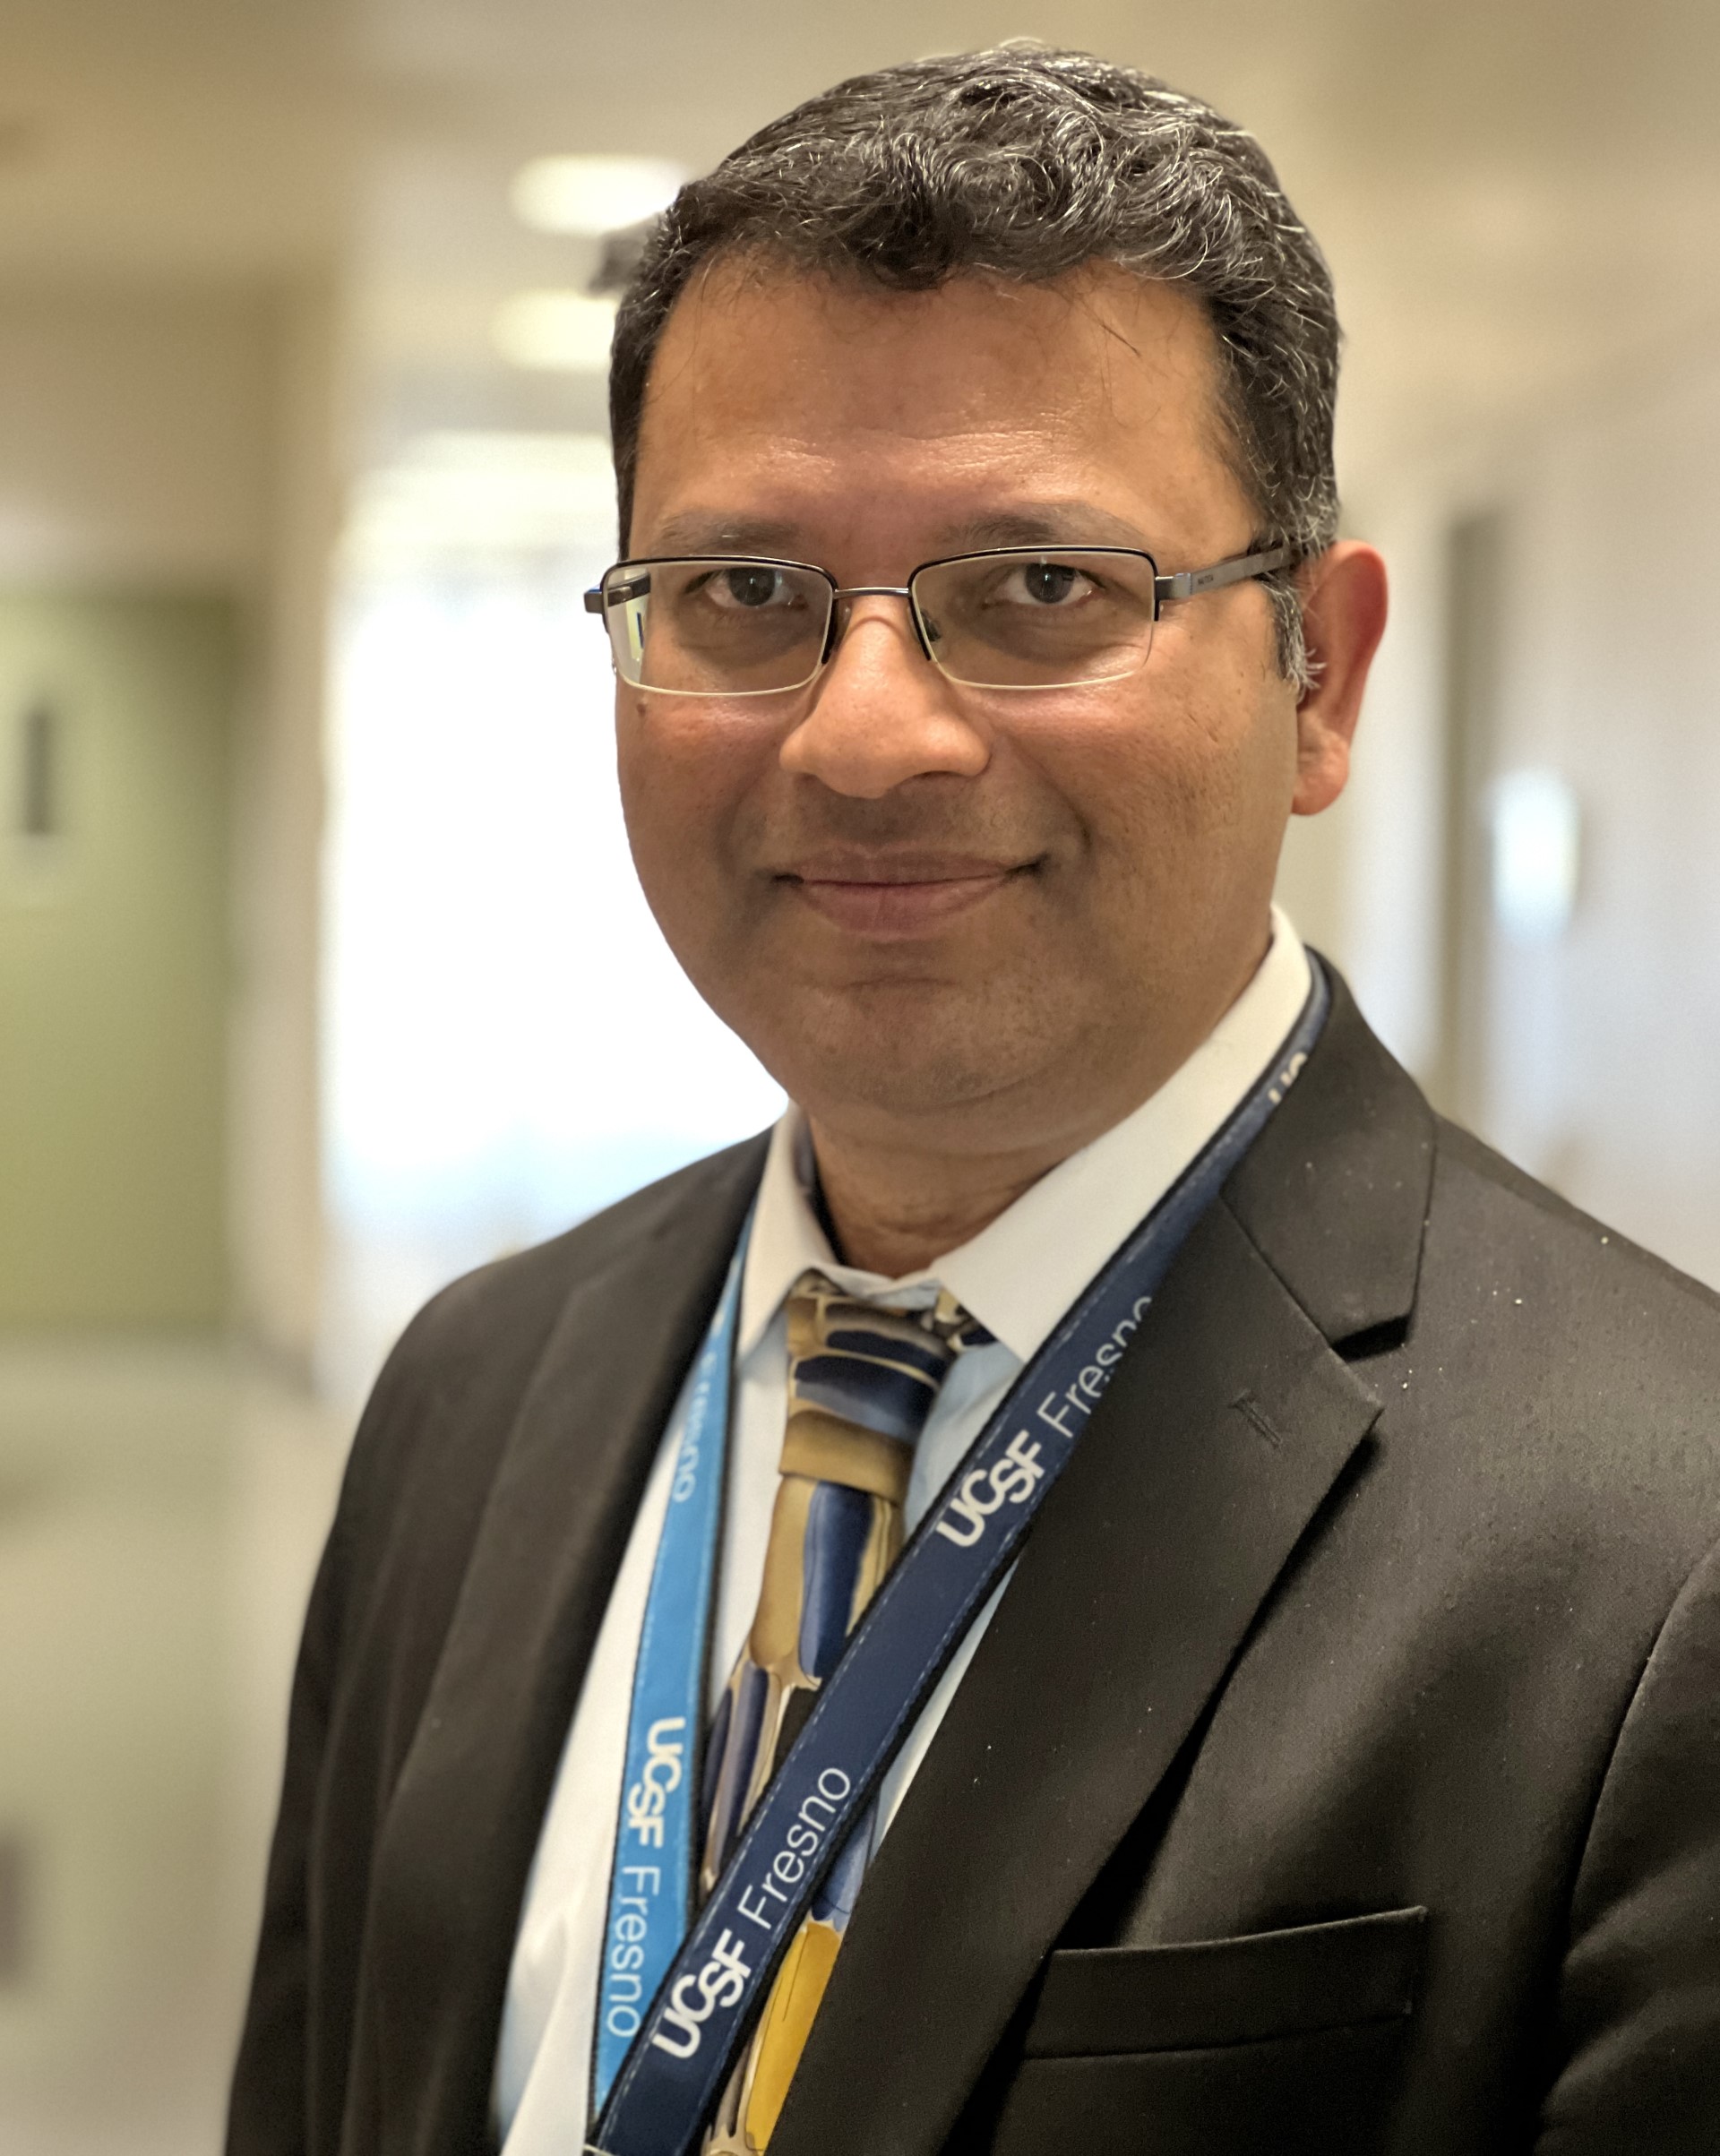 Photo of Dr. Vipul Jain in a suit.